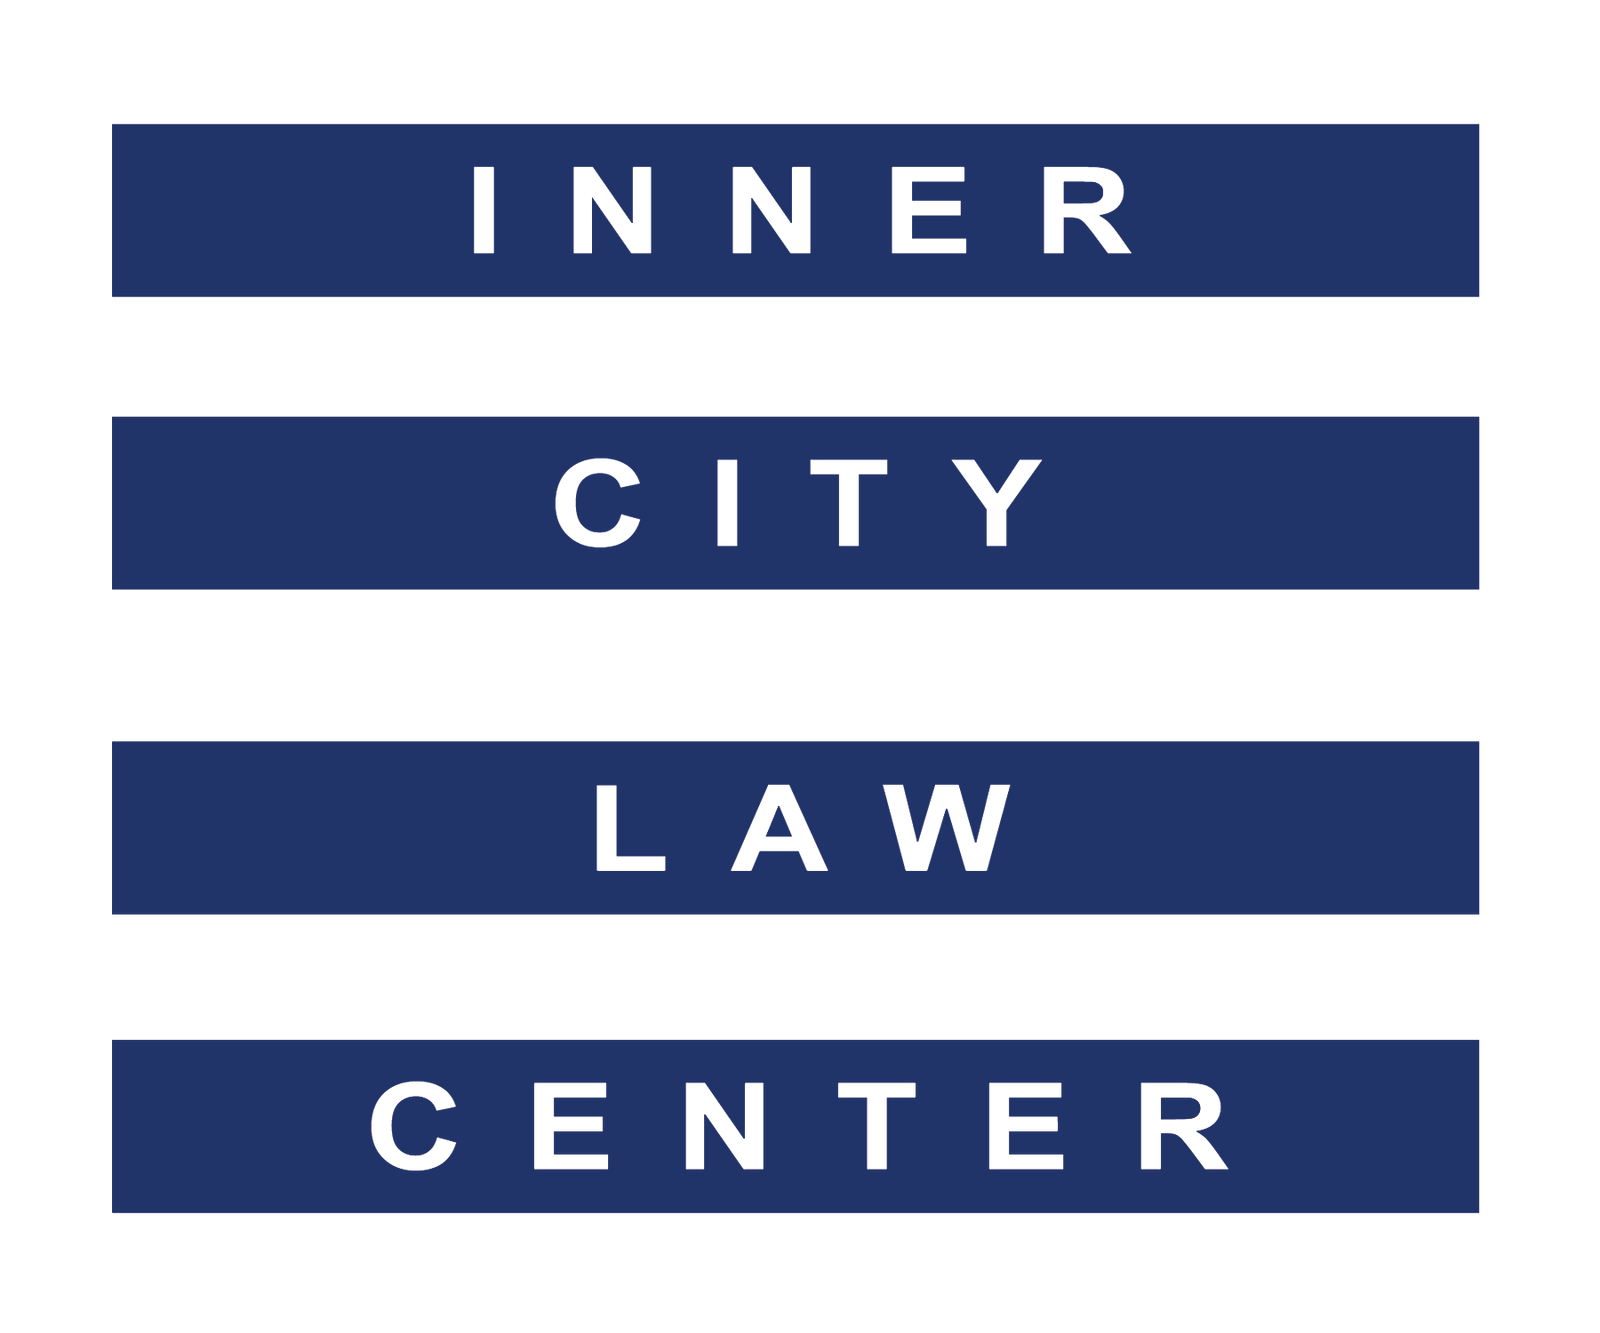 Former L.A. Supervisor Sheila Kuehl and Troutman Pepper Law Firm to be Honored at Inner City Law Center’s 23rd Annual Awards Luncheon